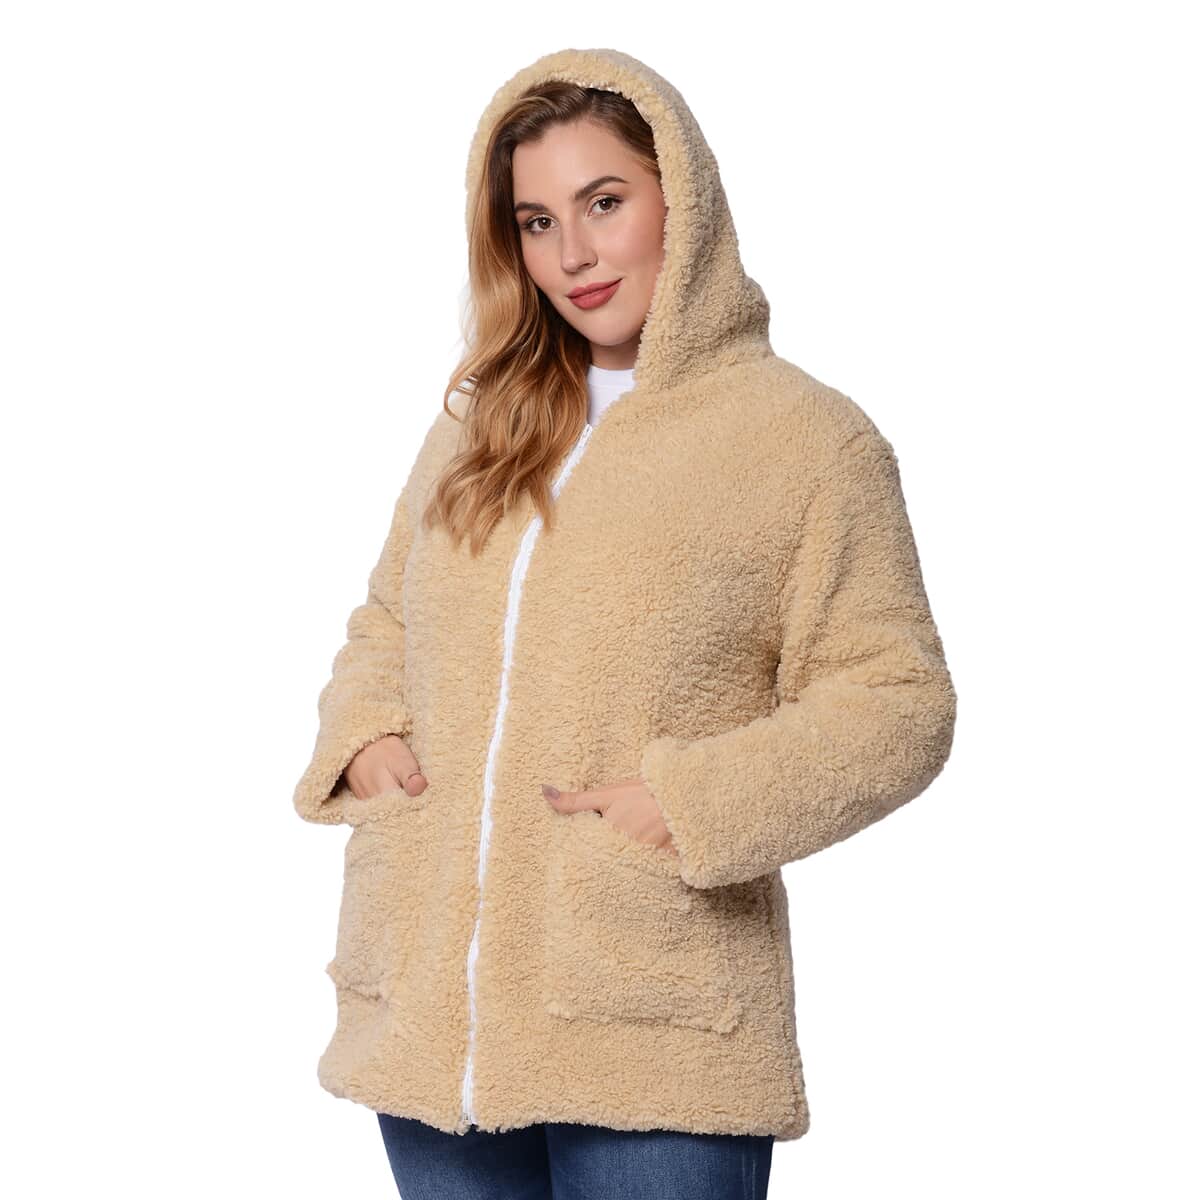 Beige Satin Lined Faux Fur Hooded Jacket with Front Pockets (M, 100% Polyester) image number 2